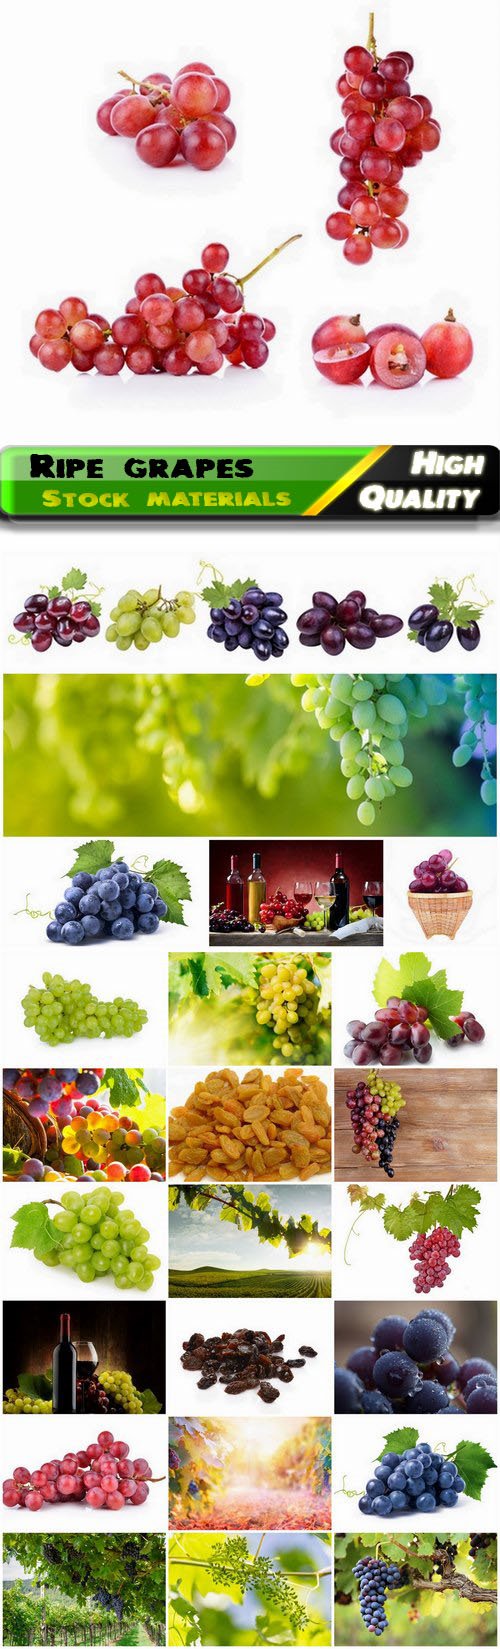 Ripe white and red grapes fruit with leaves and vine 25 HQ Jpg